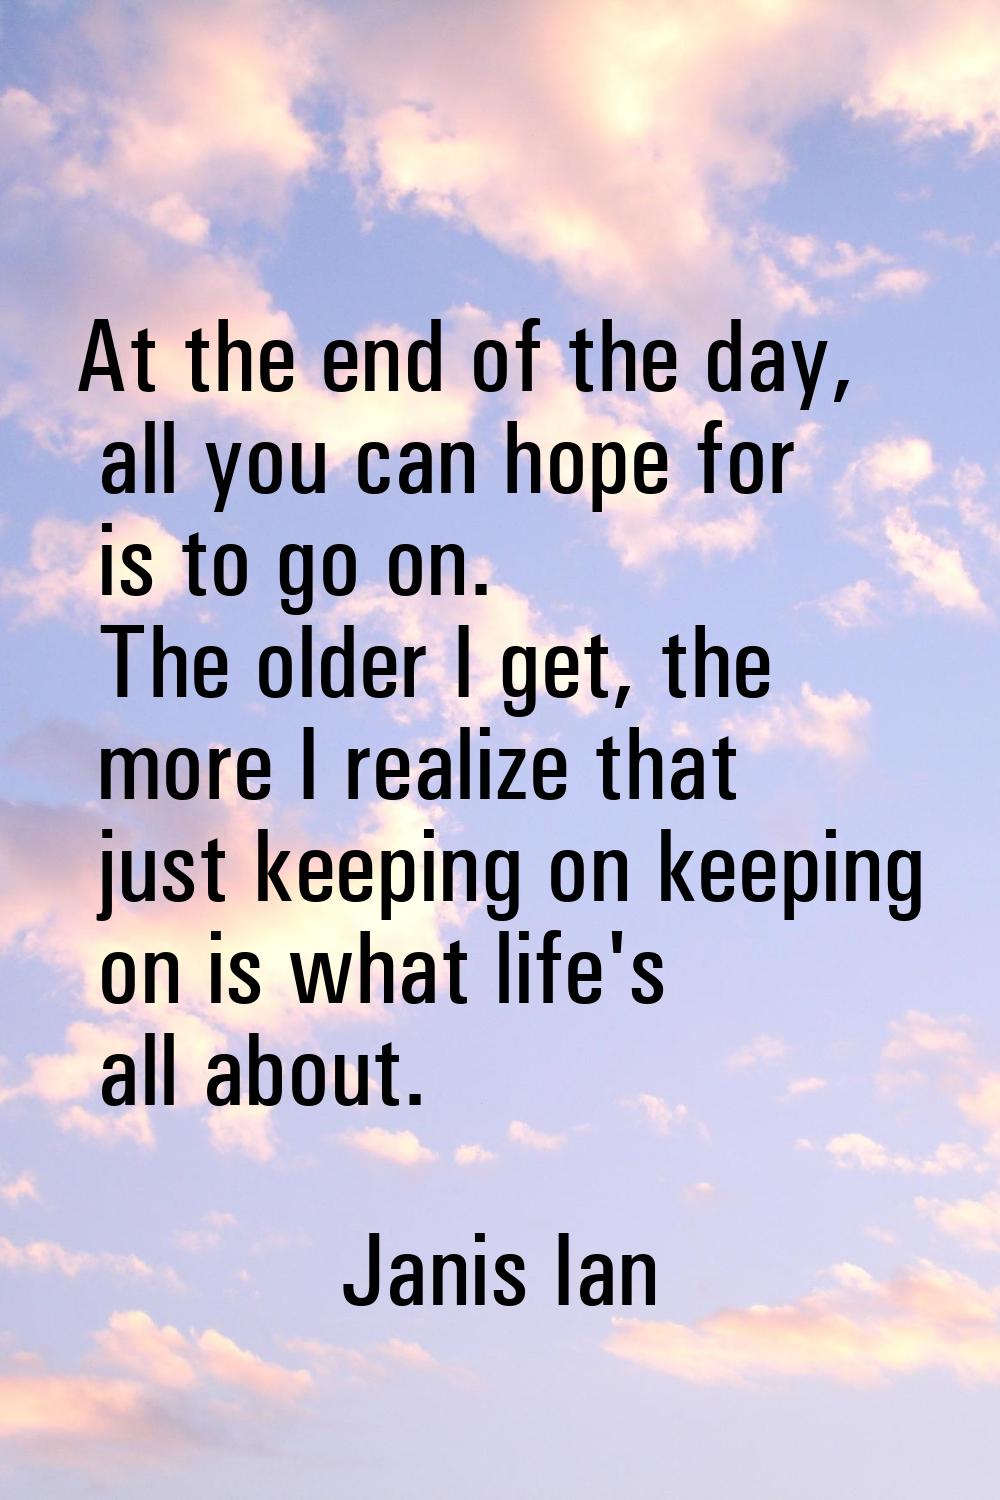 At the end of the day, all you can hope for is to go on. The older I get, the more I realize that j